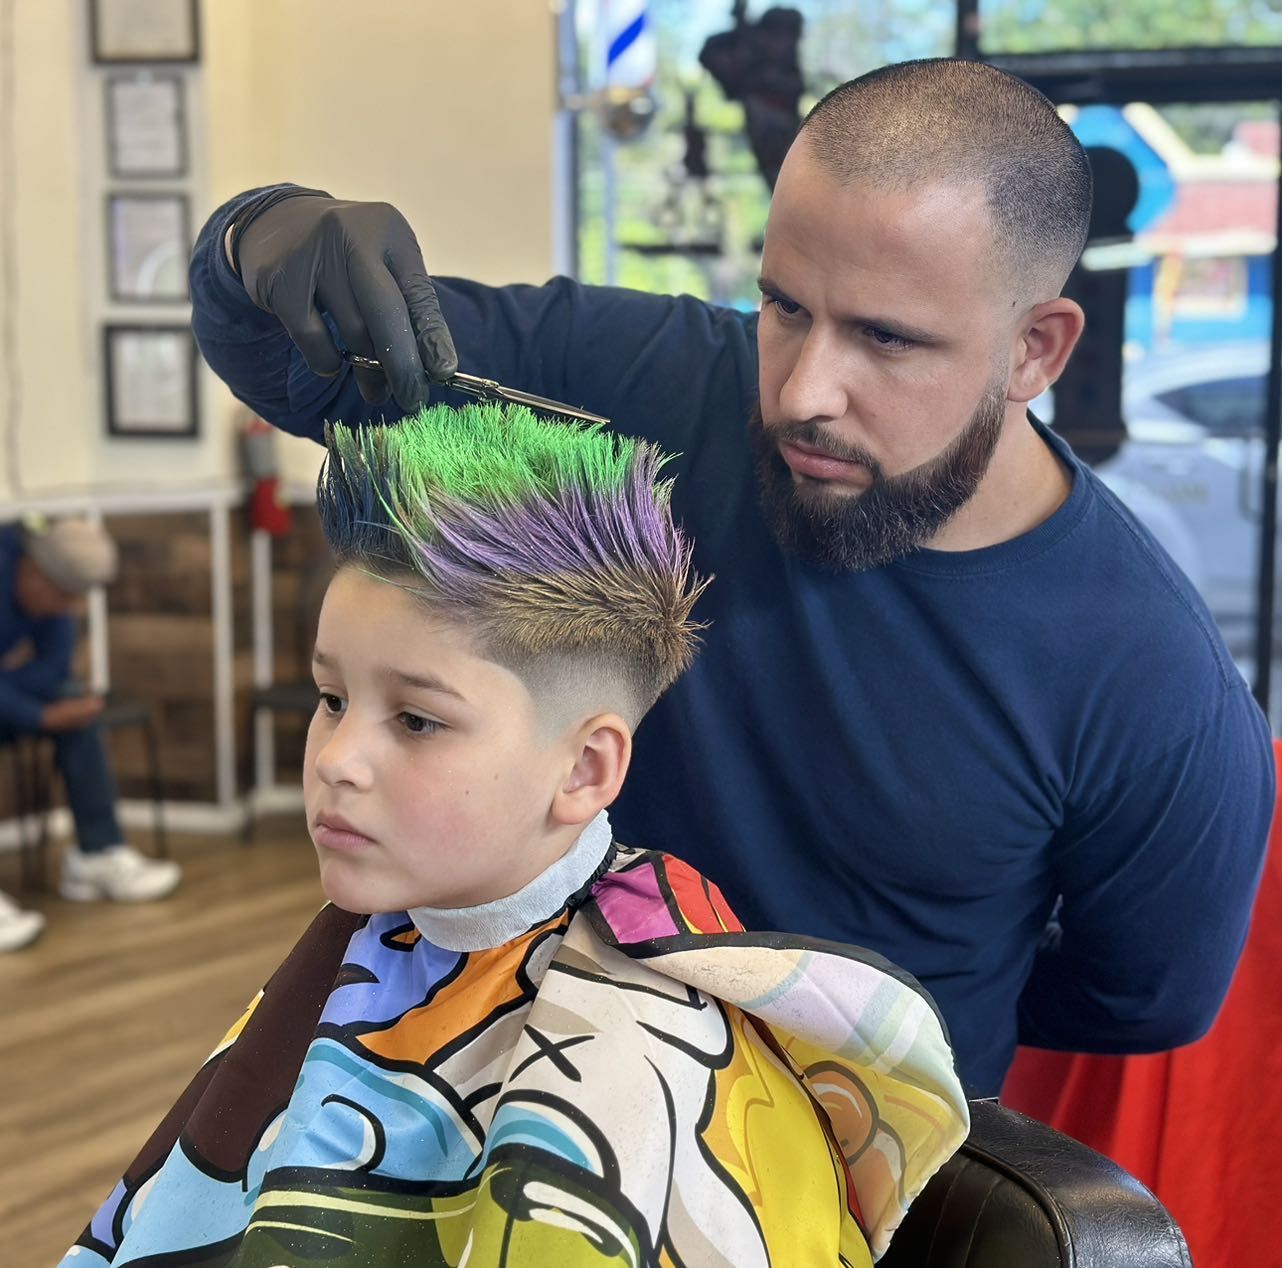 TOP 20 Haircut places near you in Jacksonville, FL - November, 2022